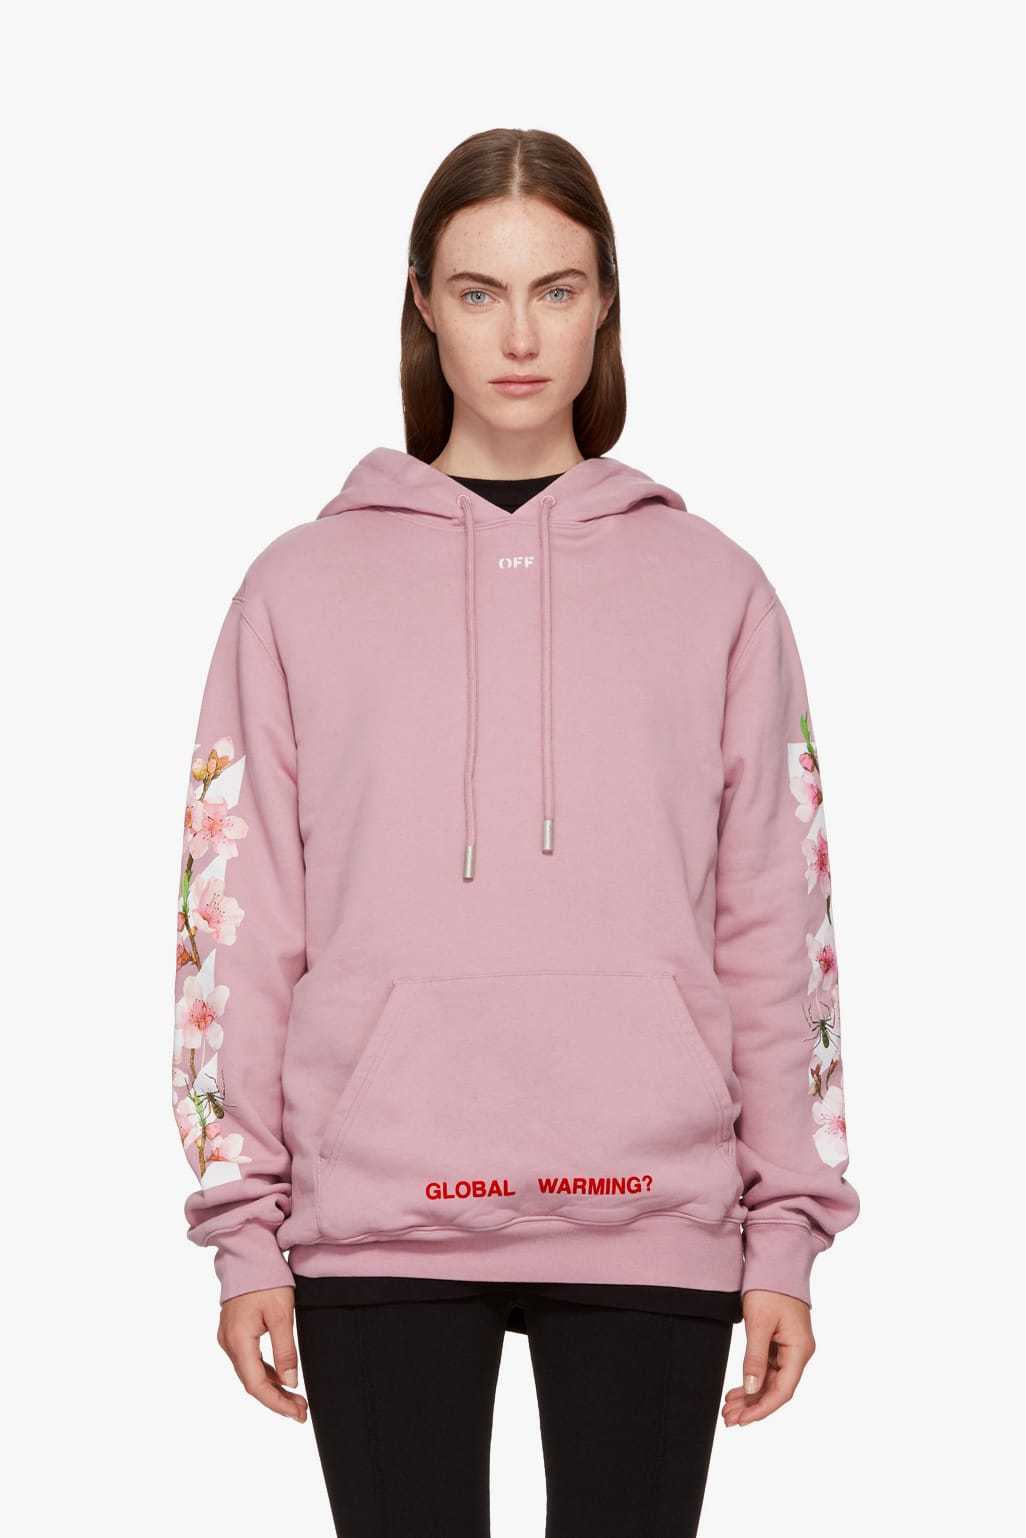 off white cherry blossom hoodie pink